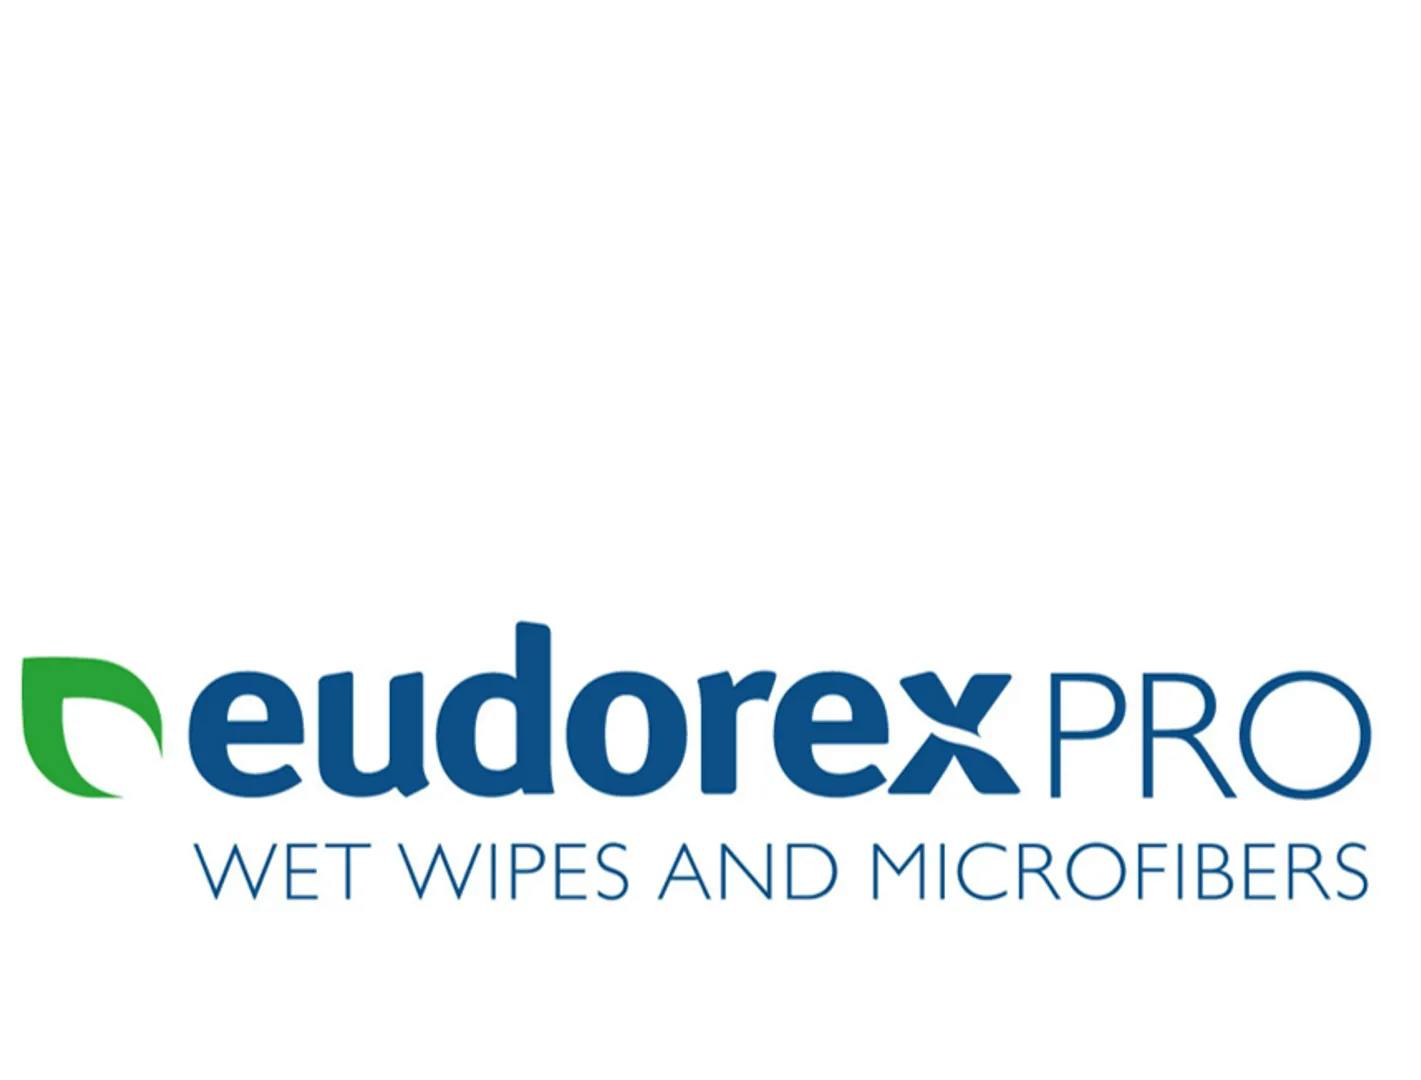 The Choice of Hygiene Professionals - EudorexPro 